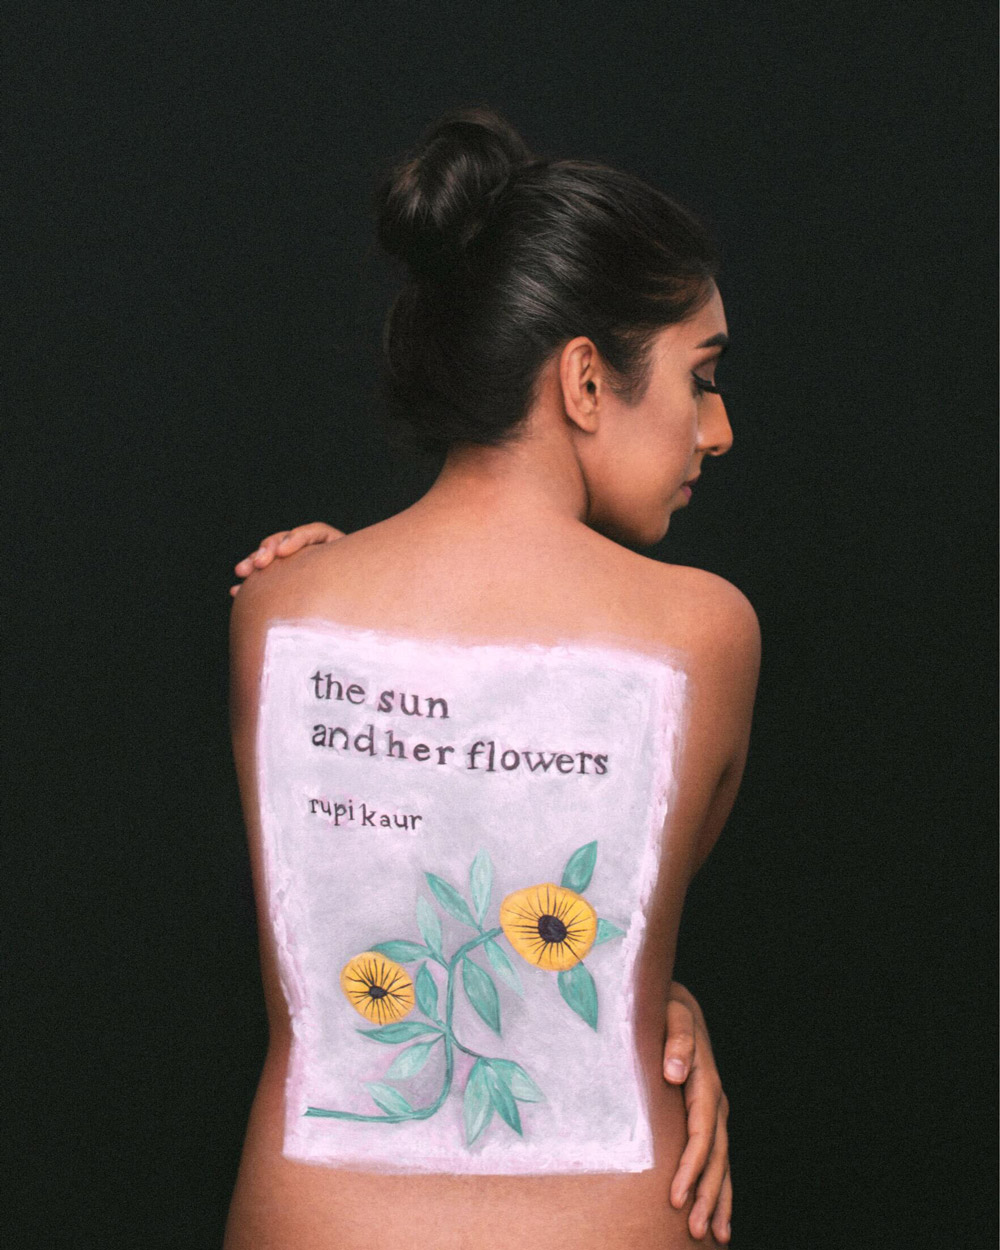 Community and Self-Help in the Poetry of Rupi Kaur